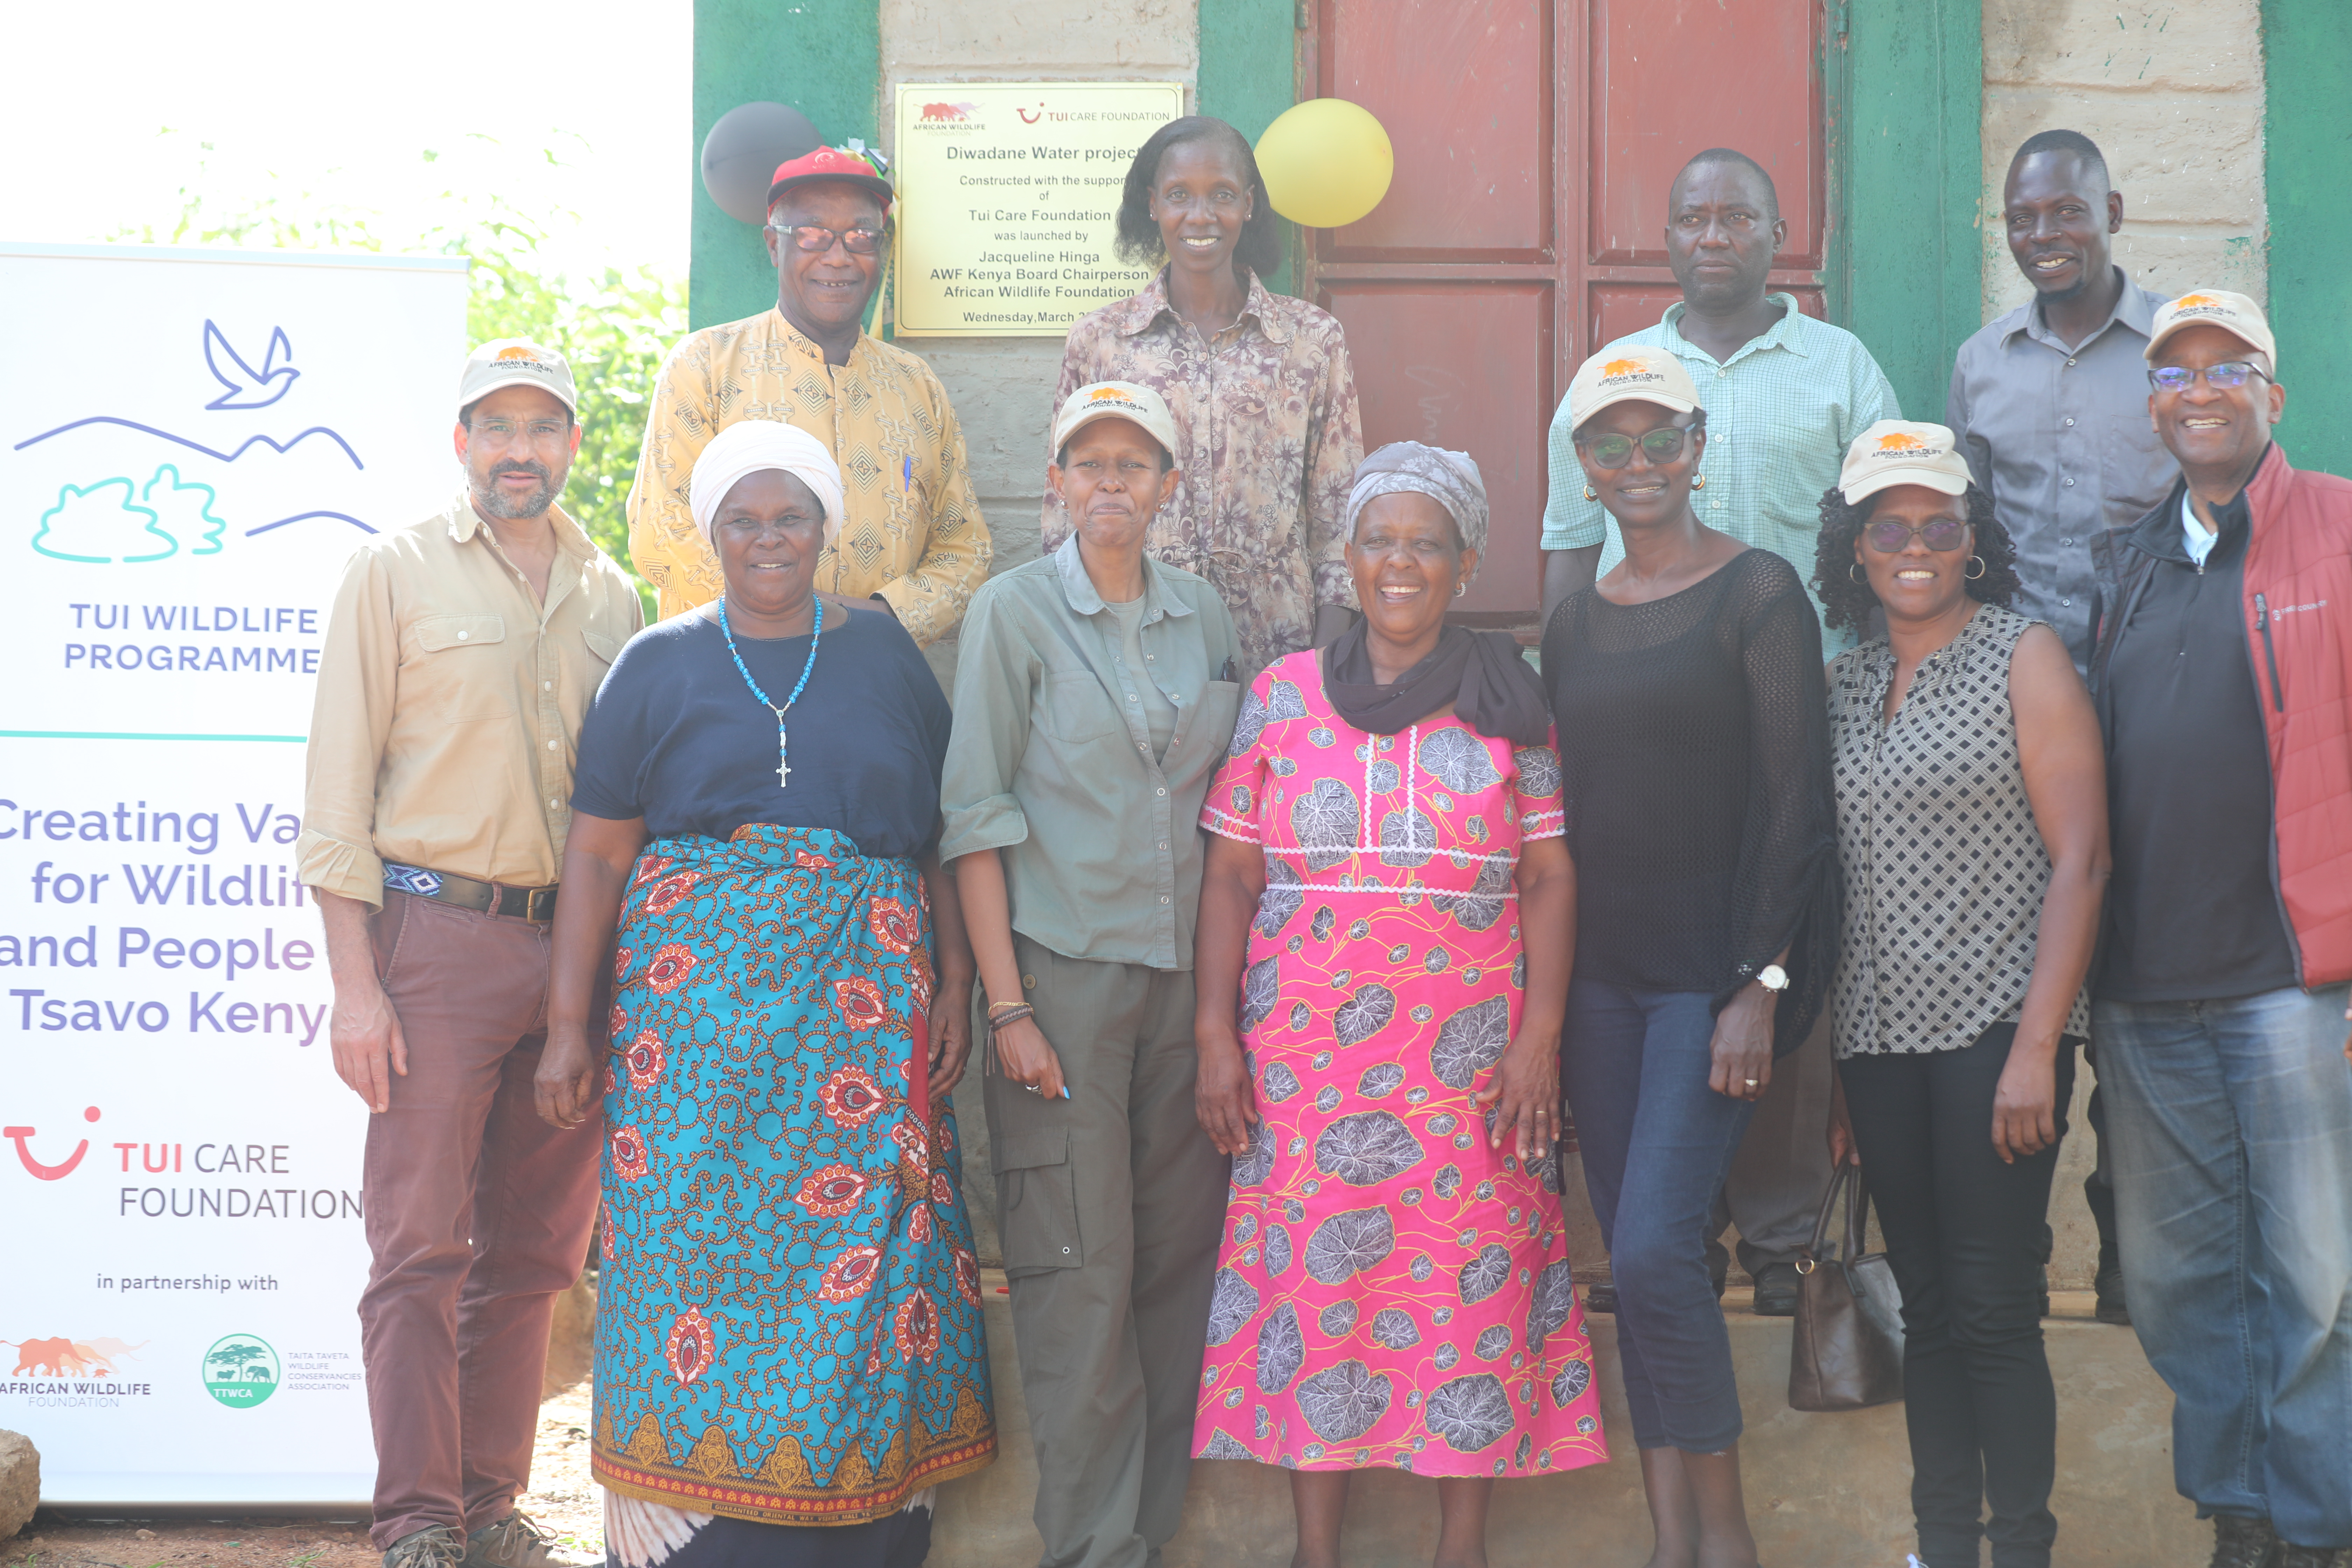 AWF Kenya Board with the leadership team of the Diwadane Cooperative Society 